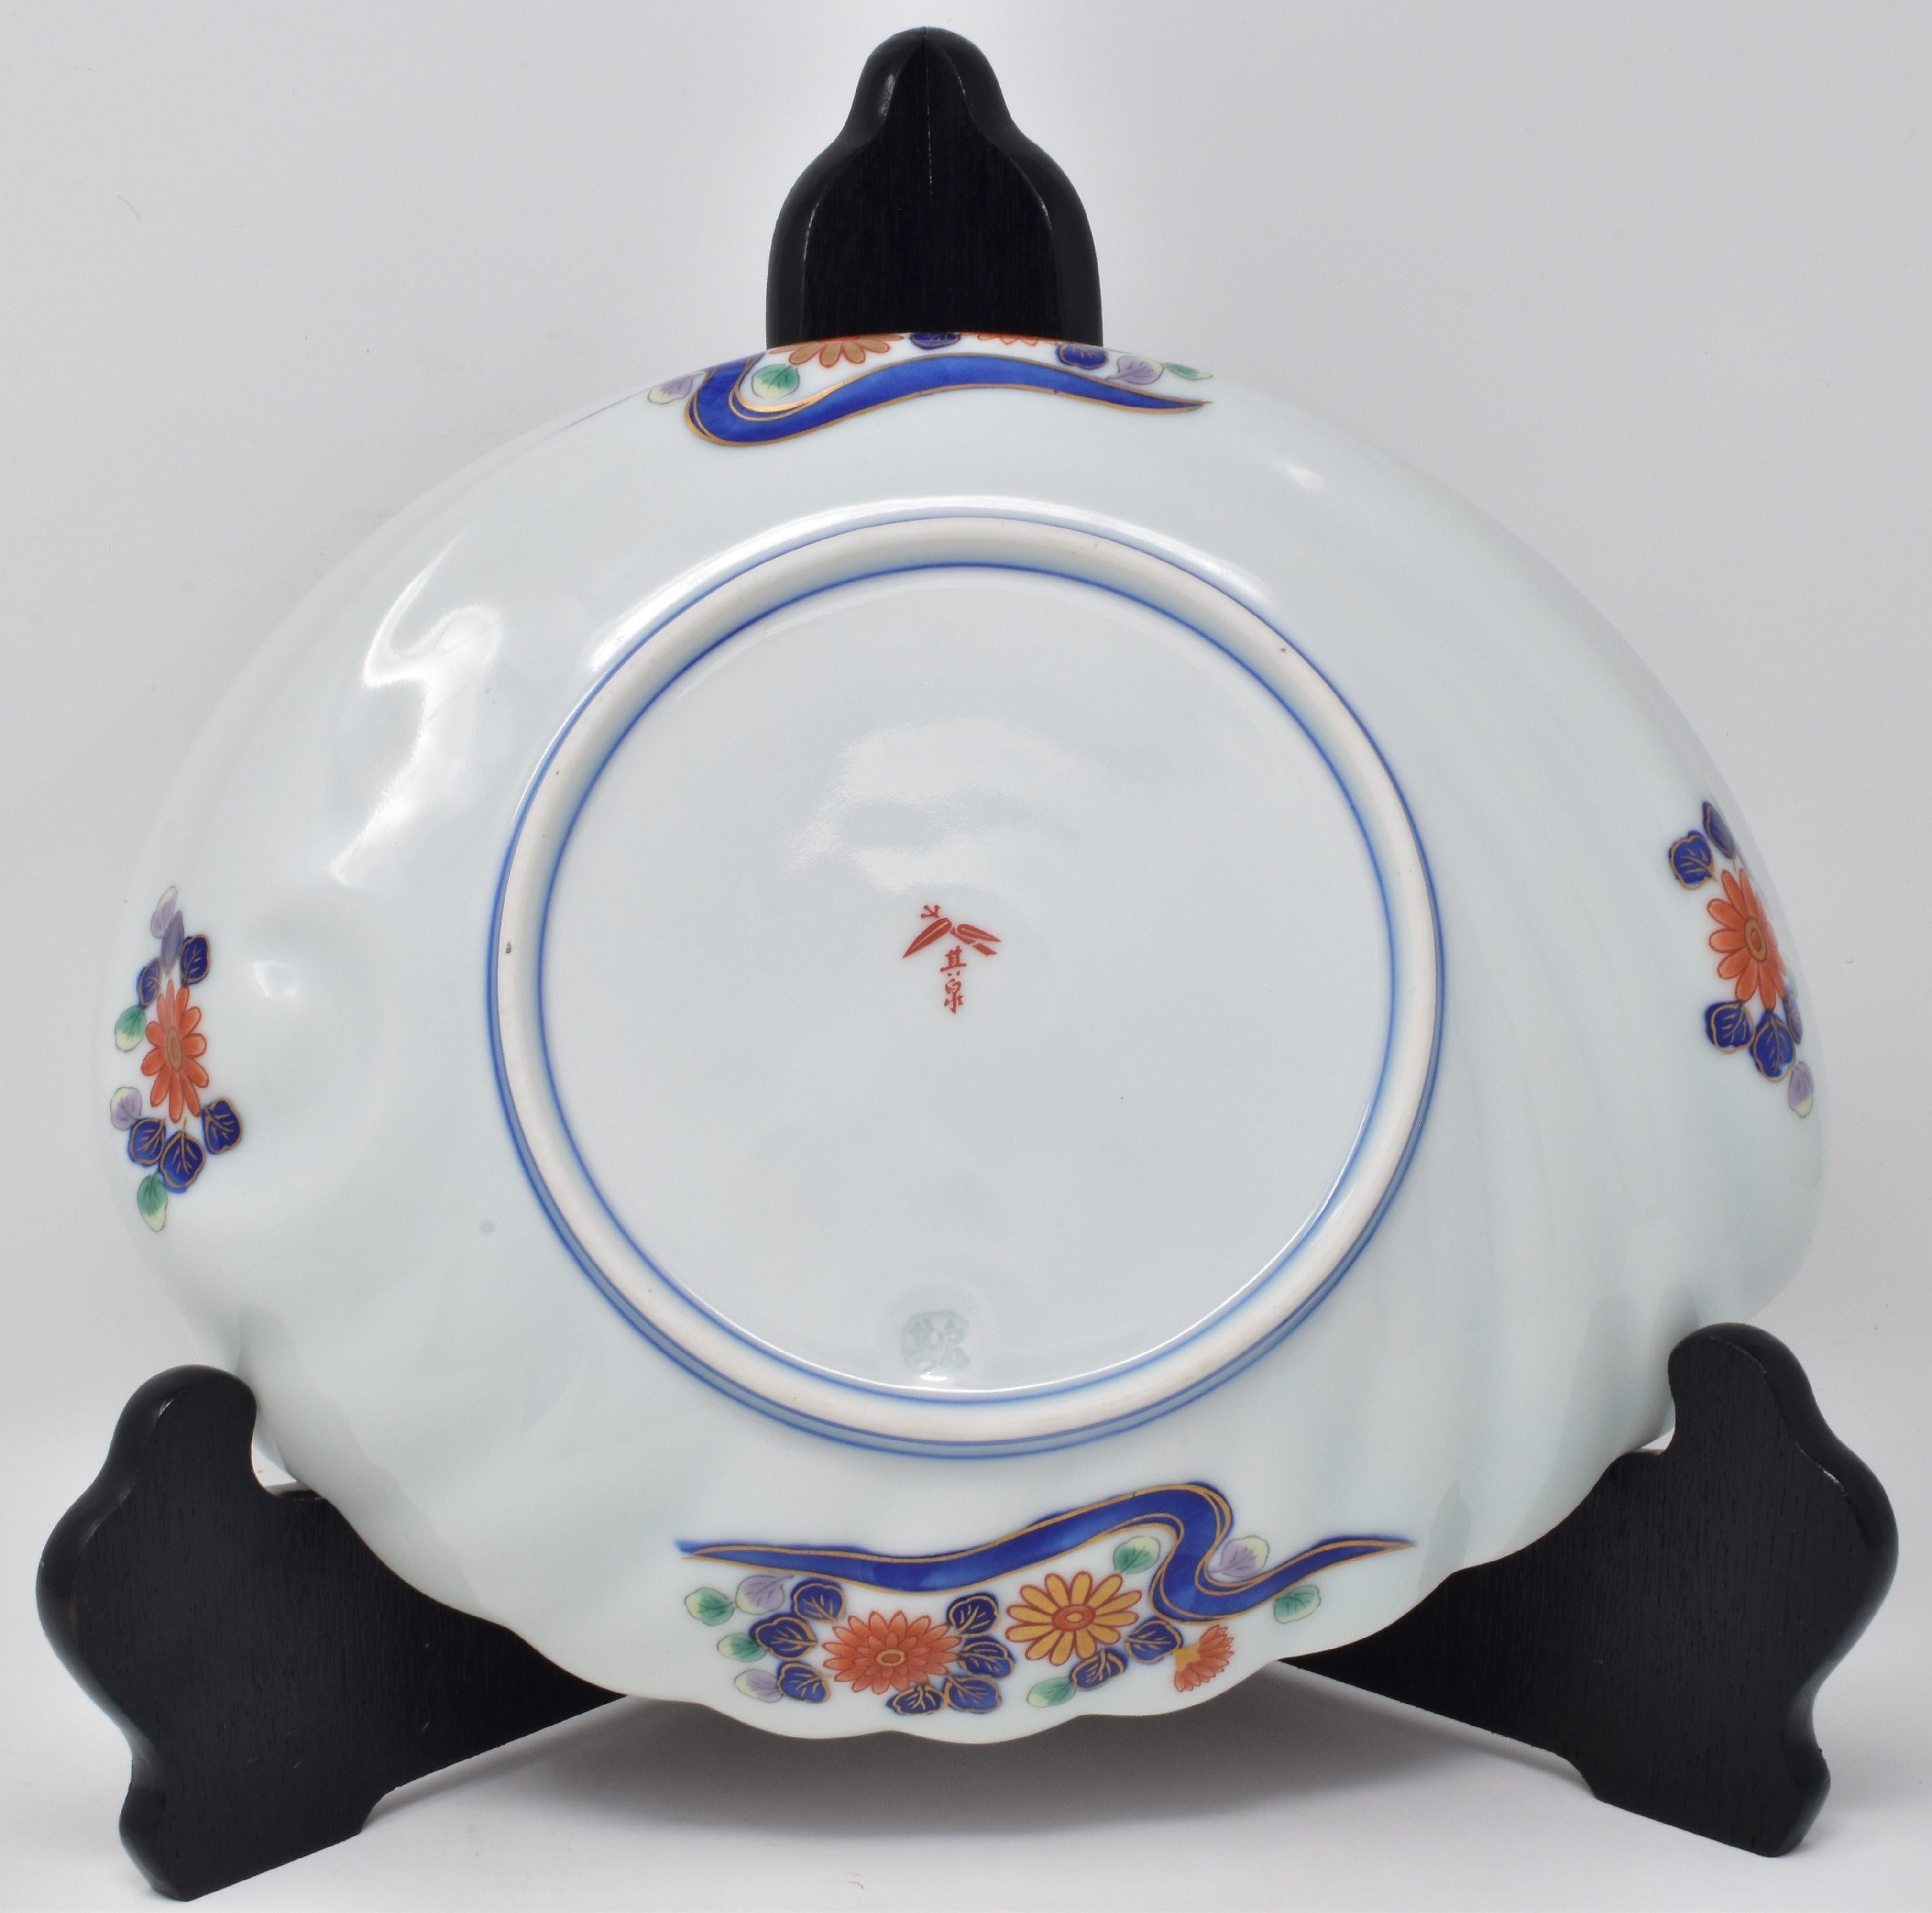 Contemporary Japanese Gilded Imari Blue Red Decorative Porcelain Charger 3